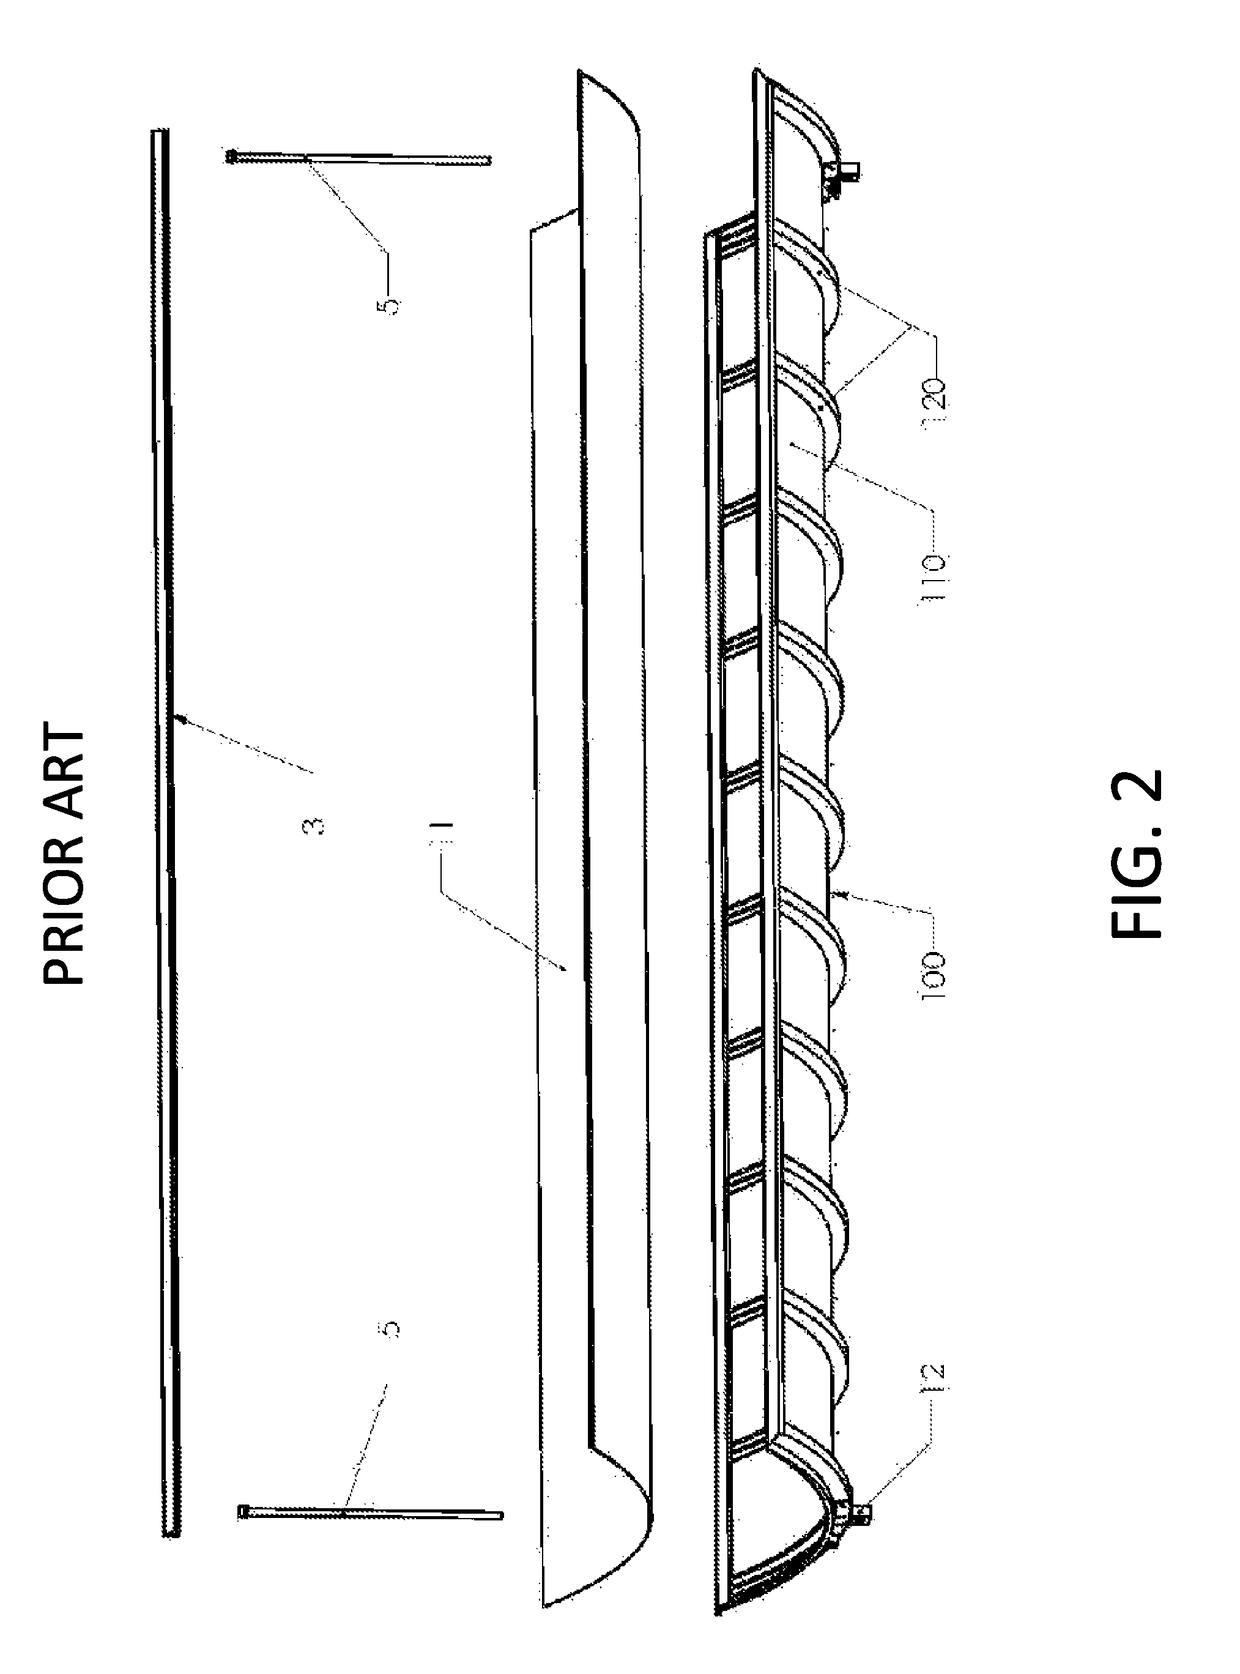 Structurally integrated parabolic trough concentrator with combined PV and thermal receiver